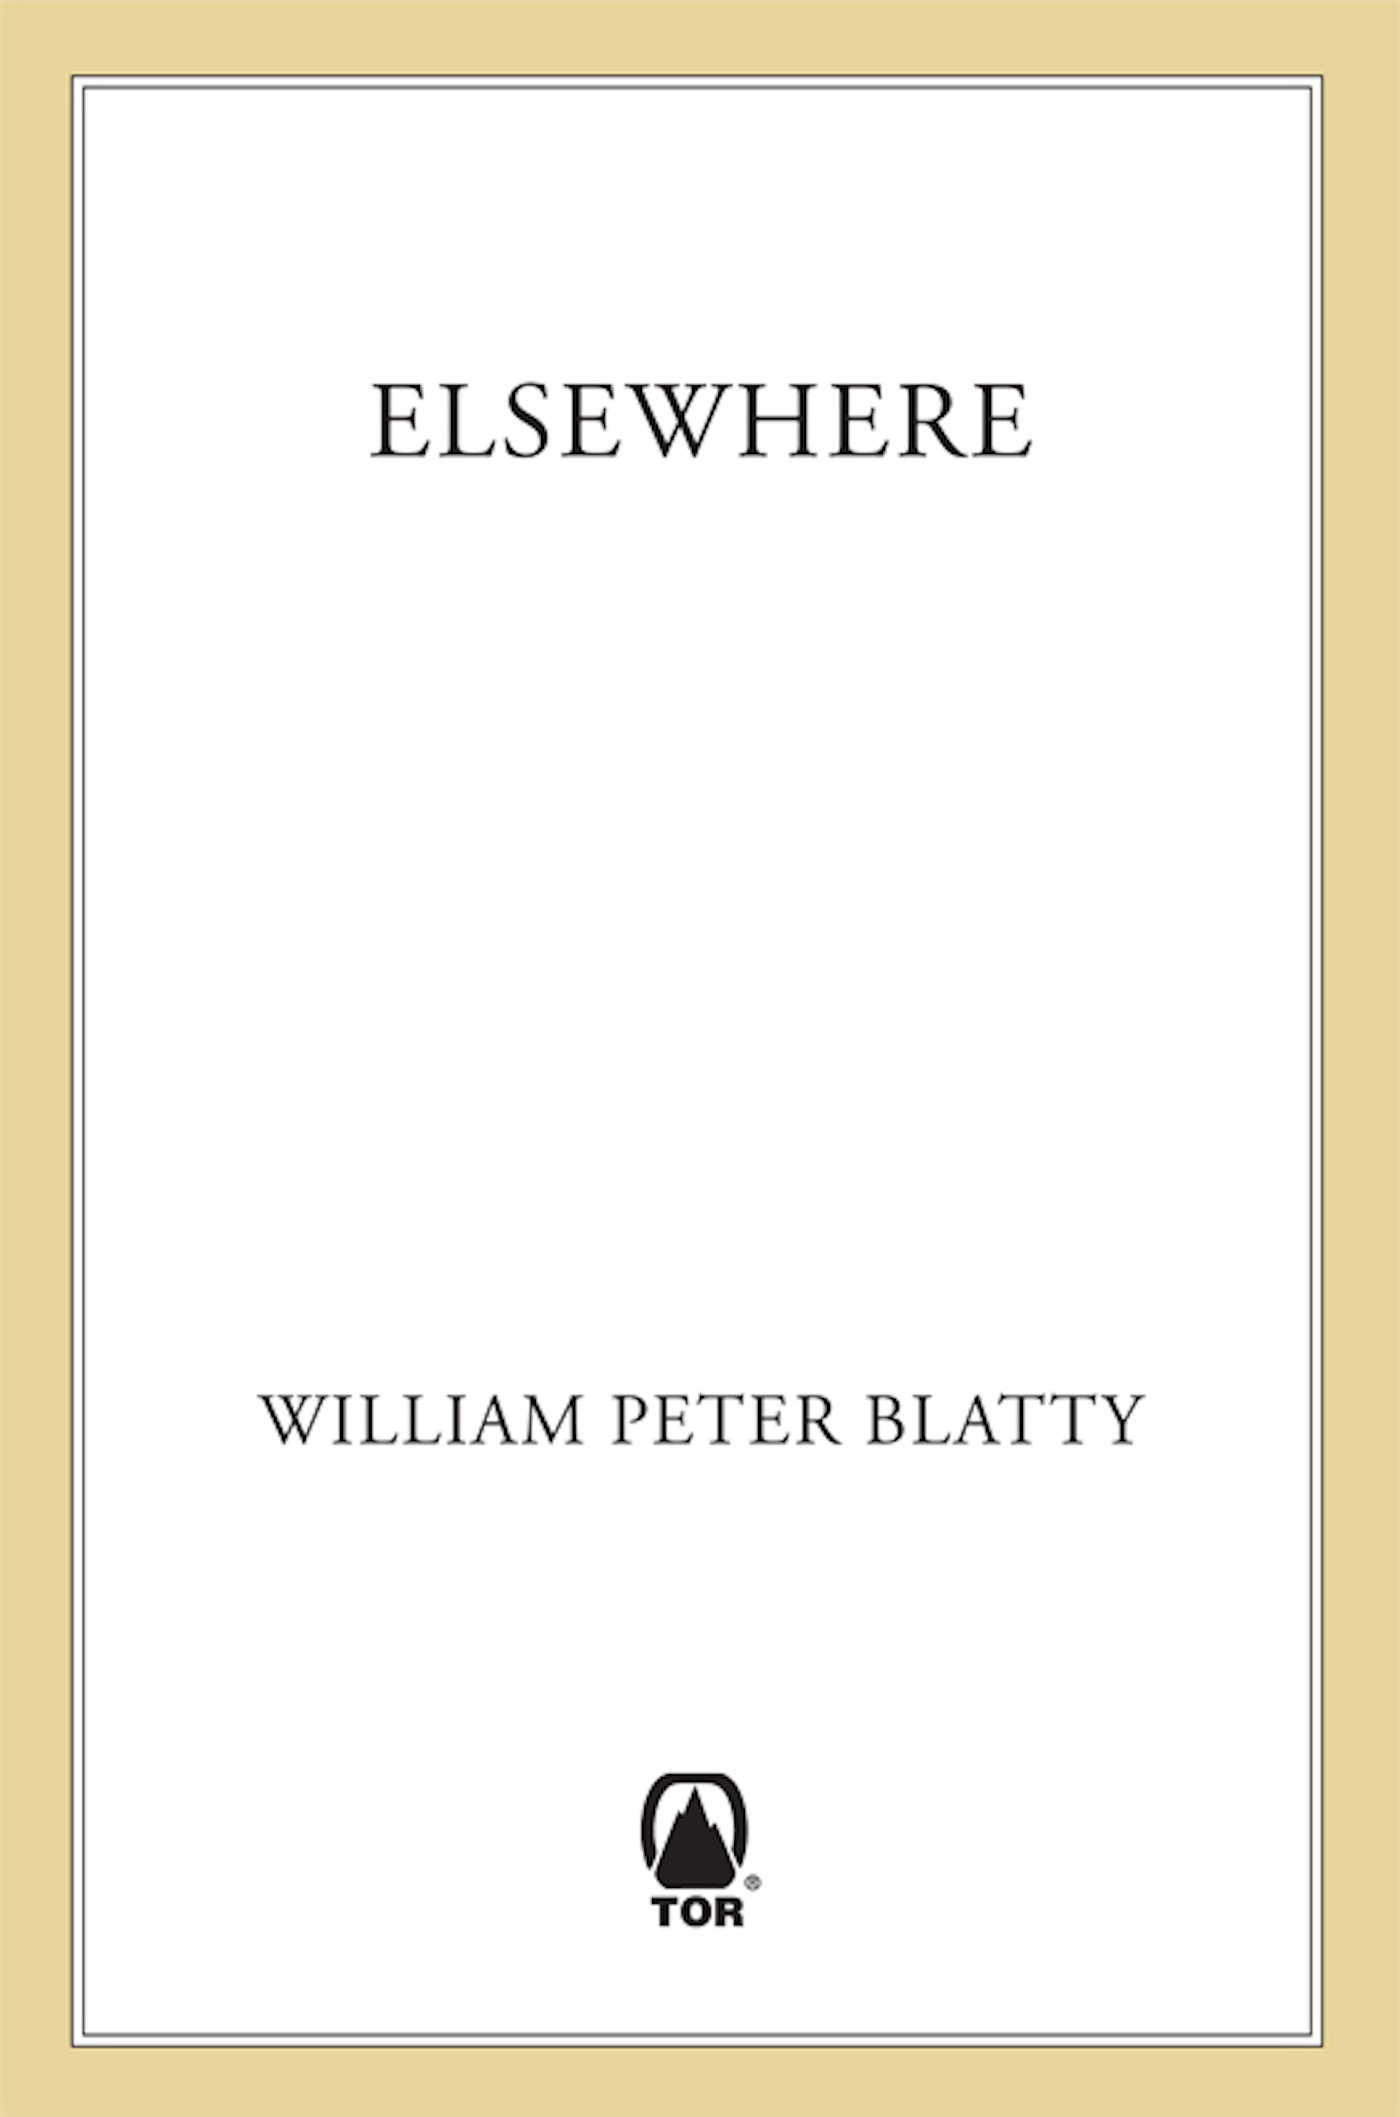 Elsewhere by William Peter Blatty